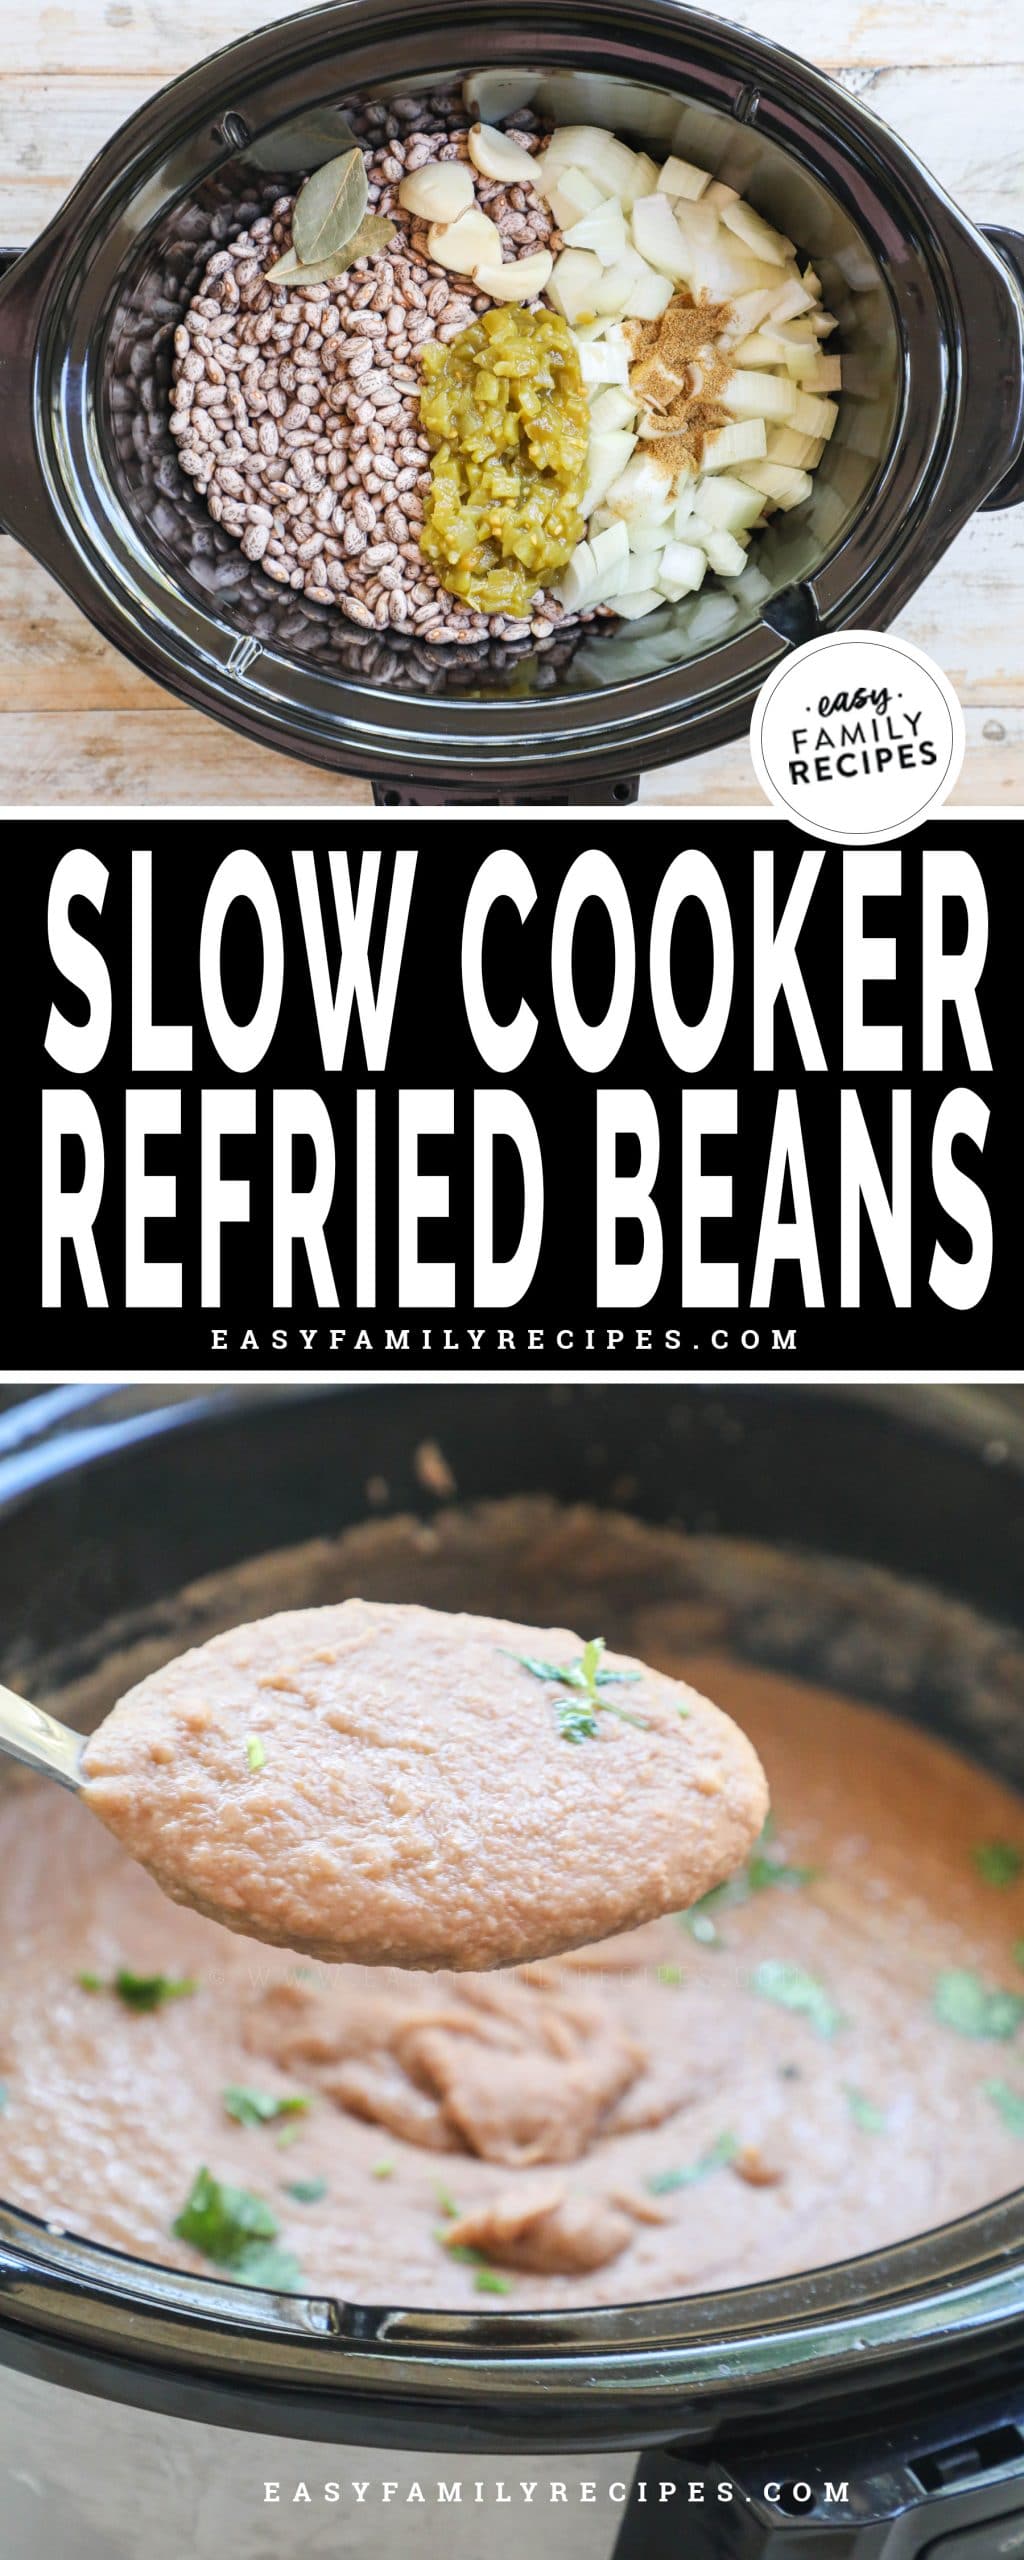 Slow cooker refried beans shown in crock pot before cooking and bottom in crockpot after cooking